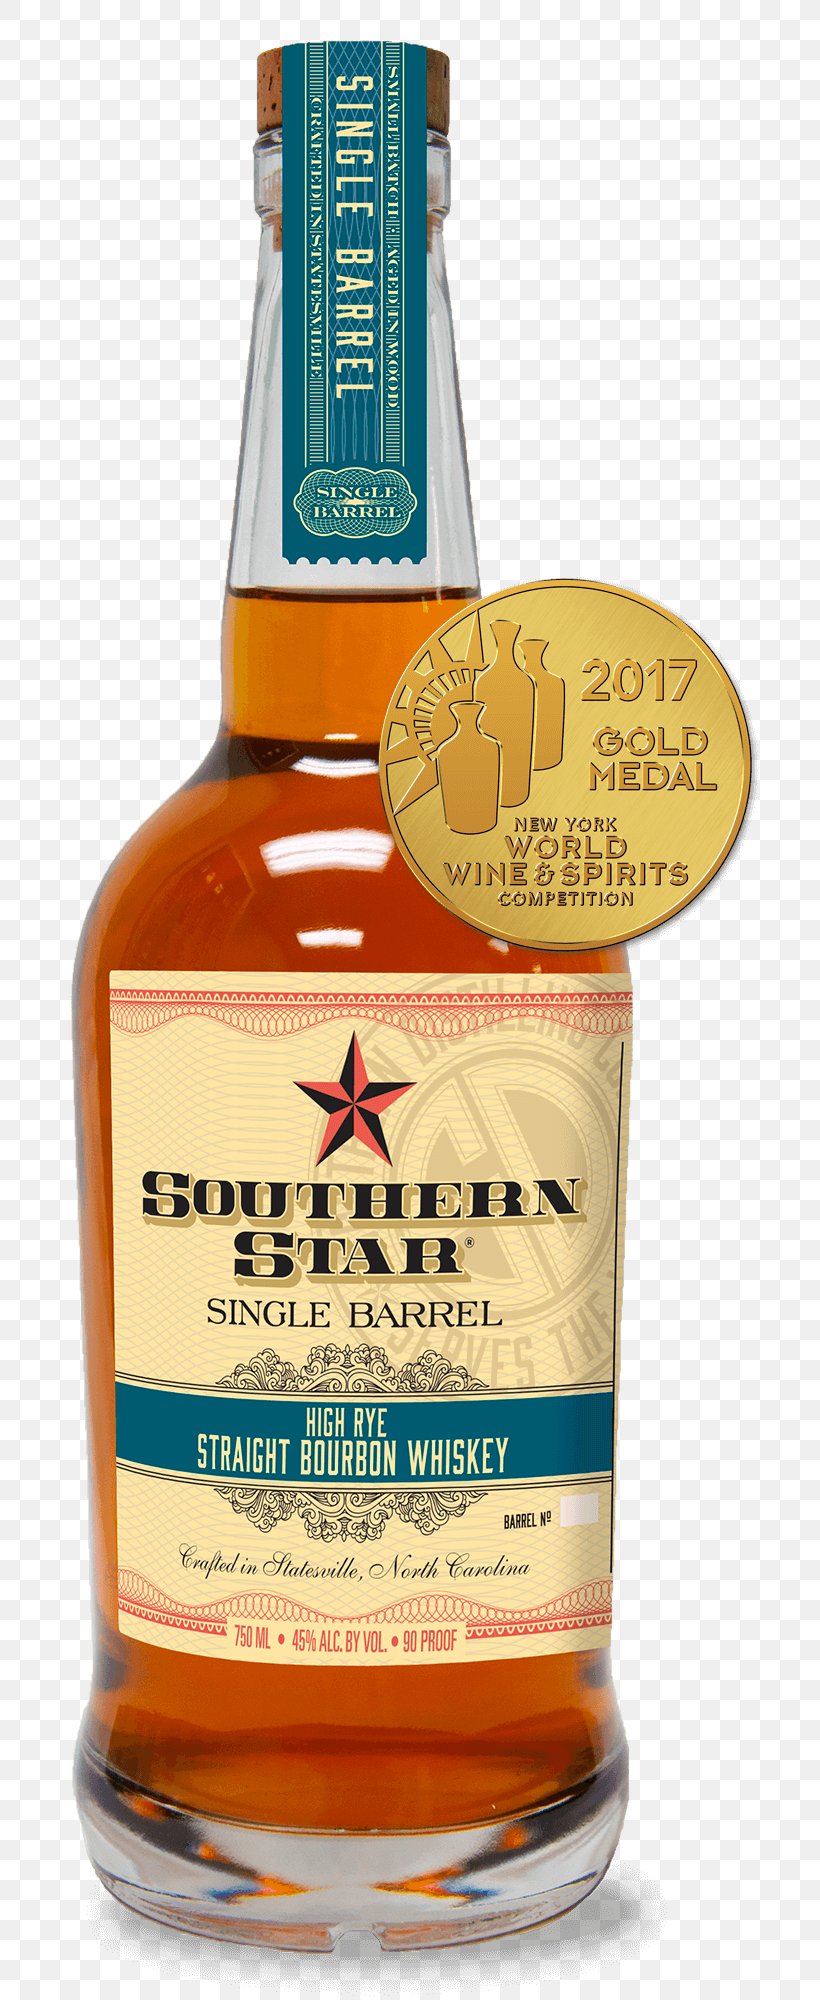 Bourbon Whiskey Distillation Distilled Beverage Southern Distilling Company, PNG, 770x2000px, Whiskey, Alcoholic Beverage, Bottle, Bourbon Whiskey, Brandy Download Free